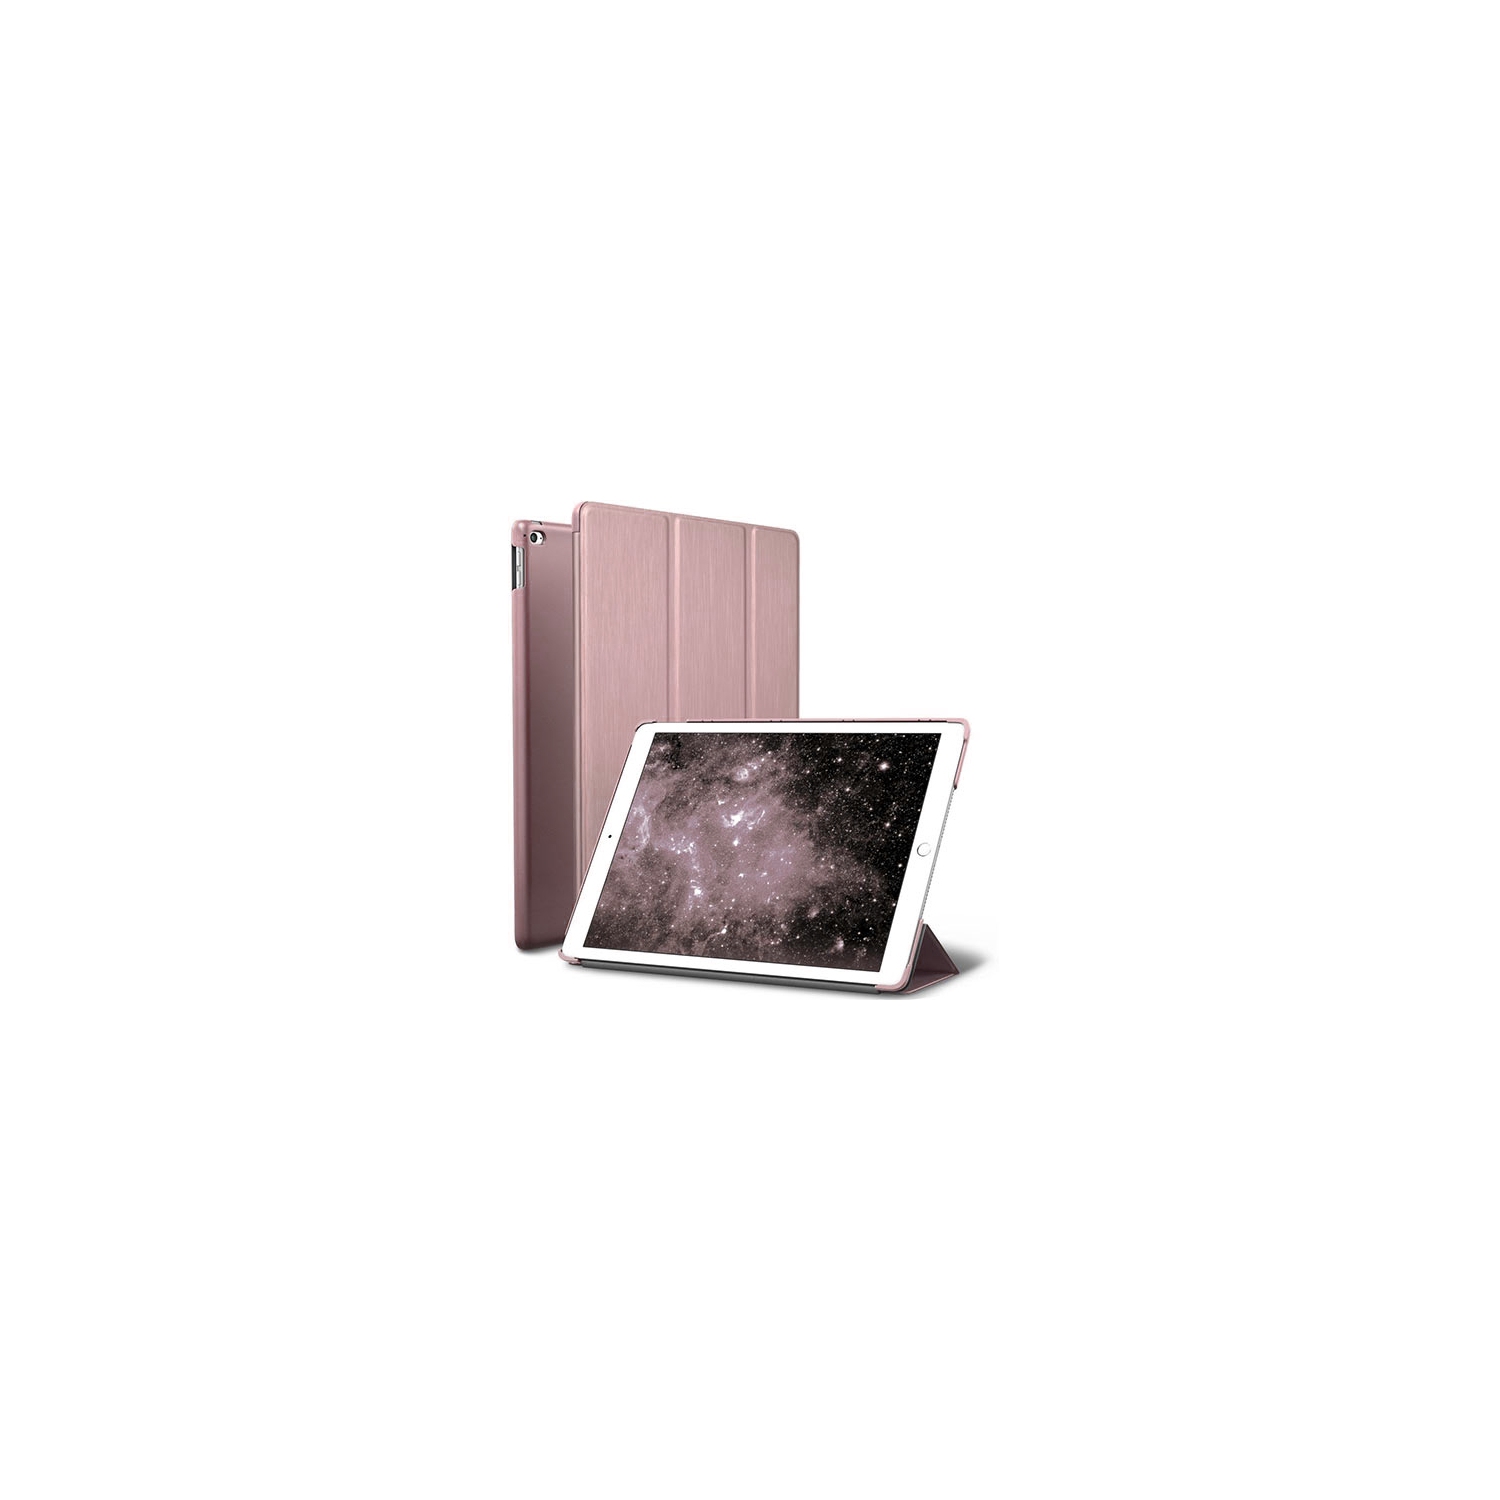 【CSmart】 Slim Magnetic Smart Cover Stand Case for iPad 5th 6th Gen / Air 1 2 1st 2nd Gen (9.7"), Rose Gold